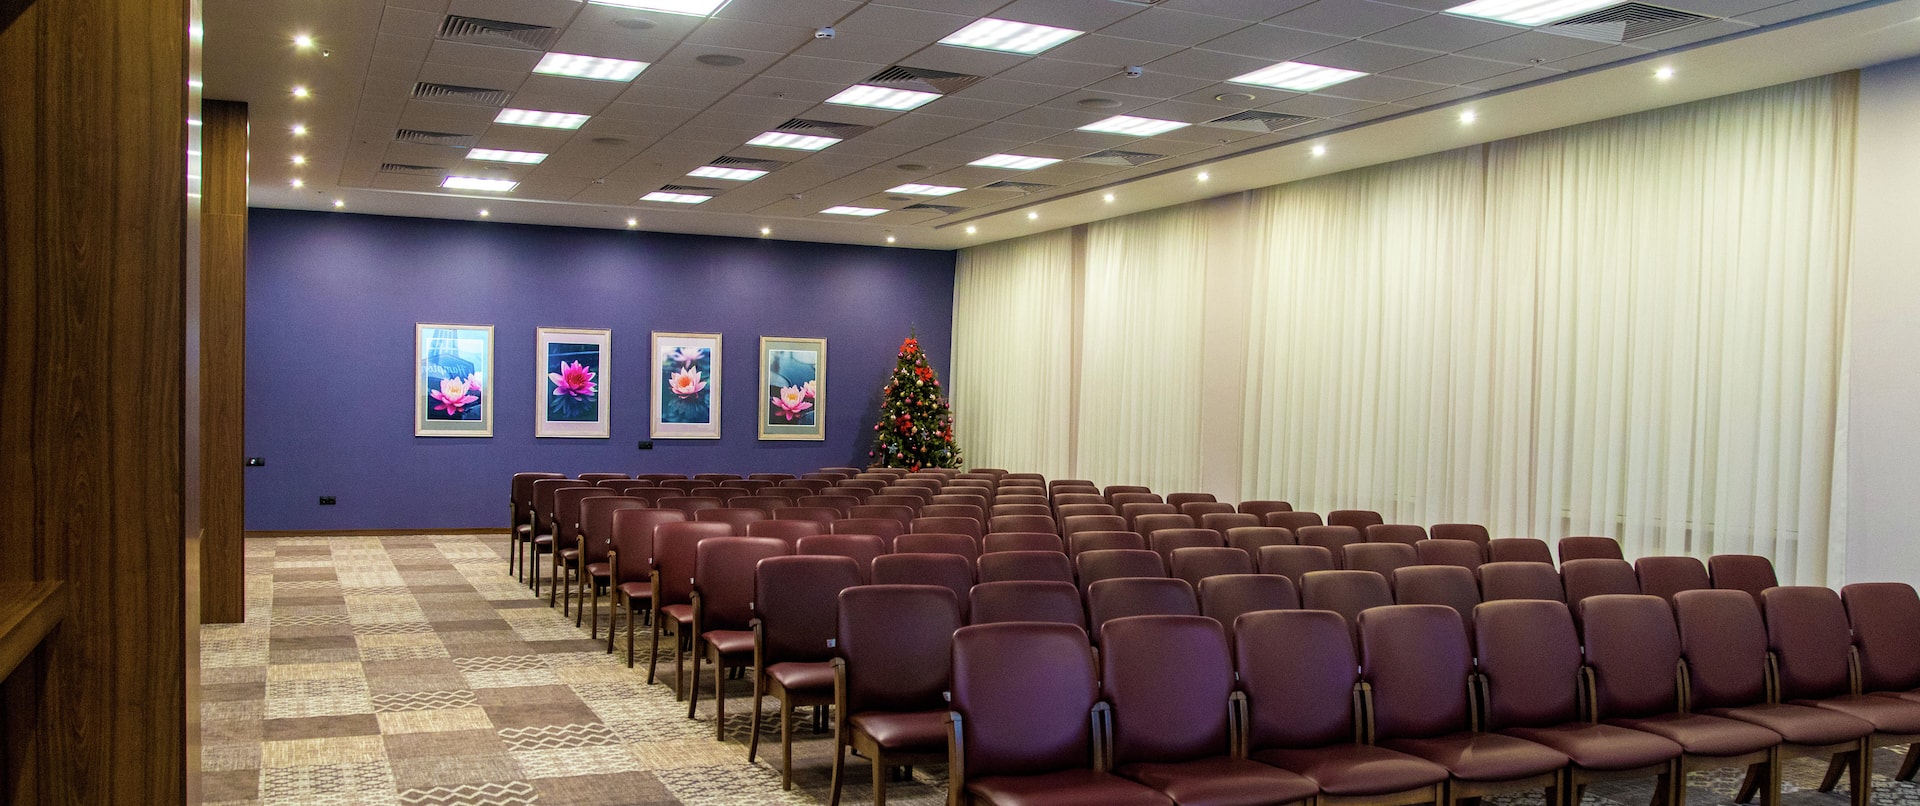 Chairs in Theater Style Setup in Meeting Room